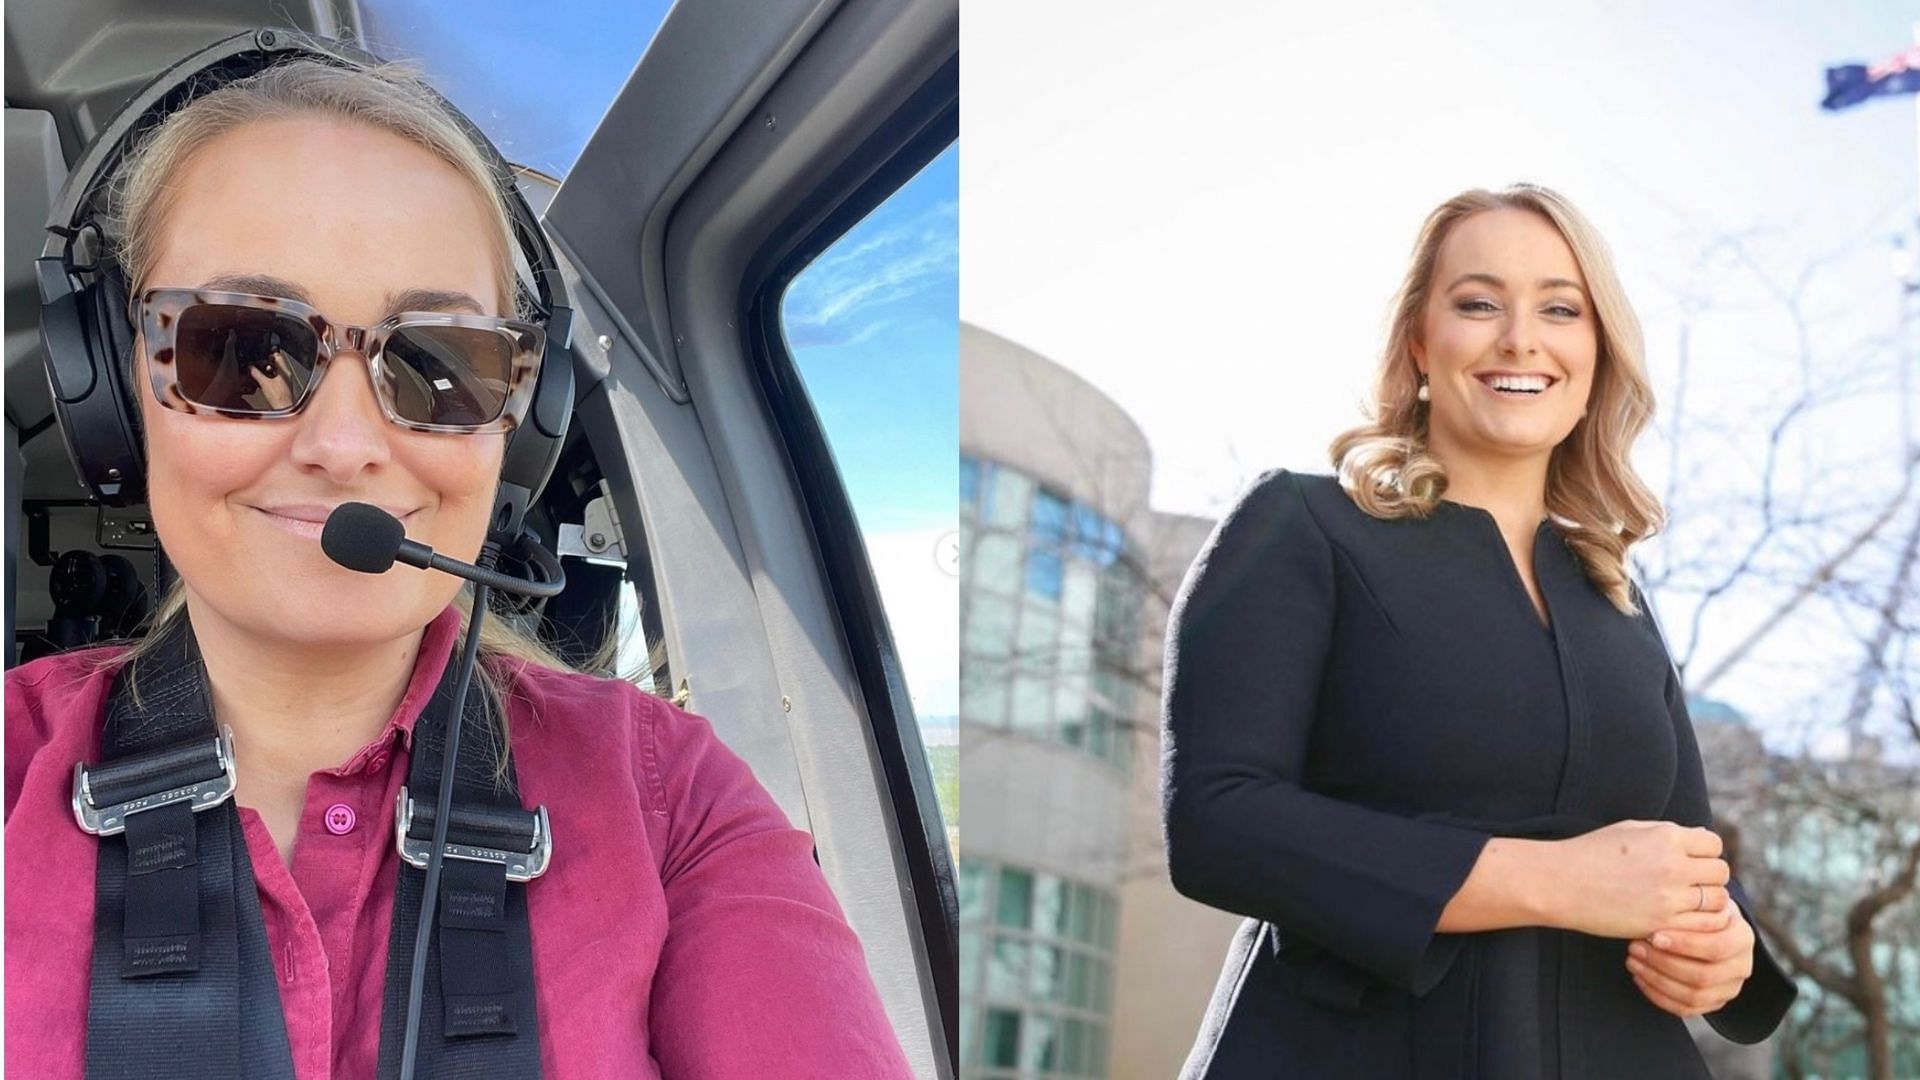 News reporter Andrea Crothers slaps herself in the face. (Images via Instagram/@abcrothers)